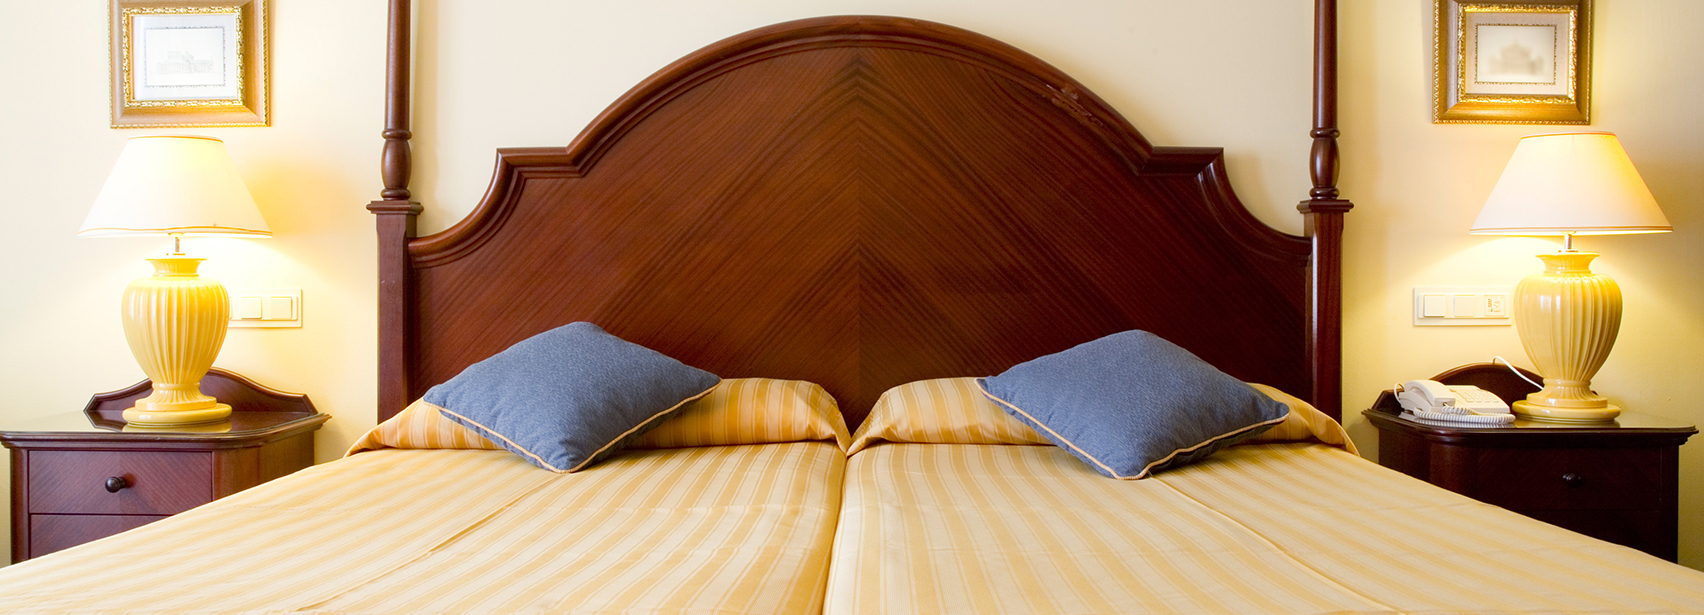 Two Twins Into A King Size Mattress, Is A Double Bed The Same As Two Twins